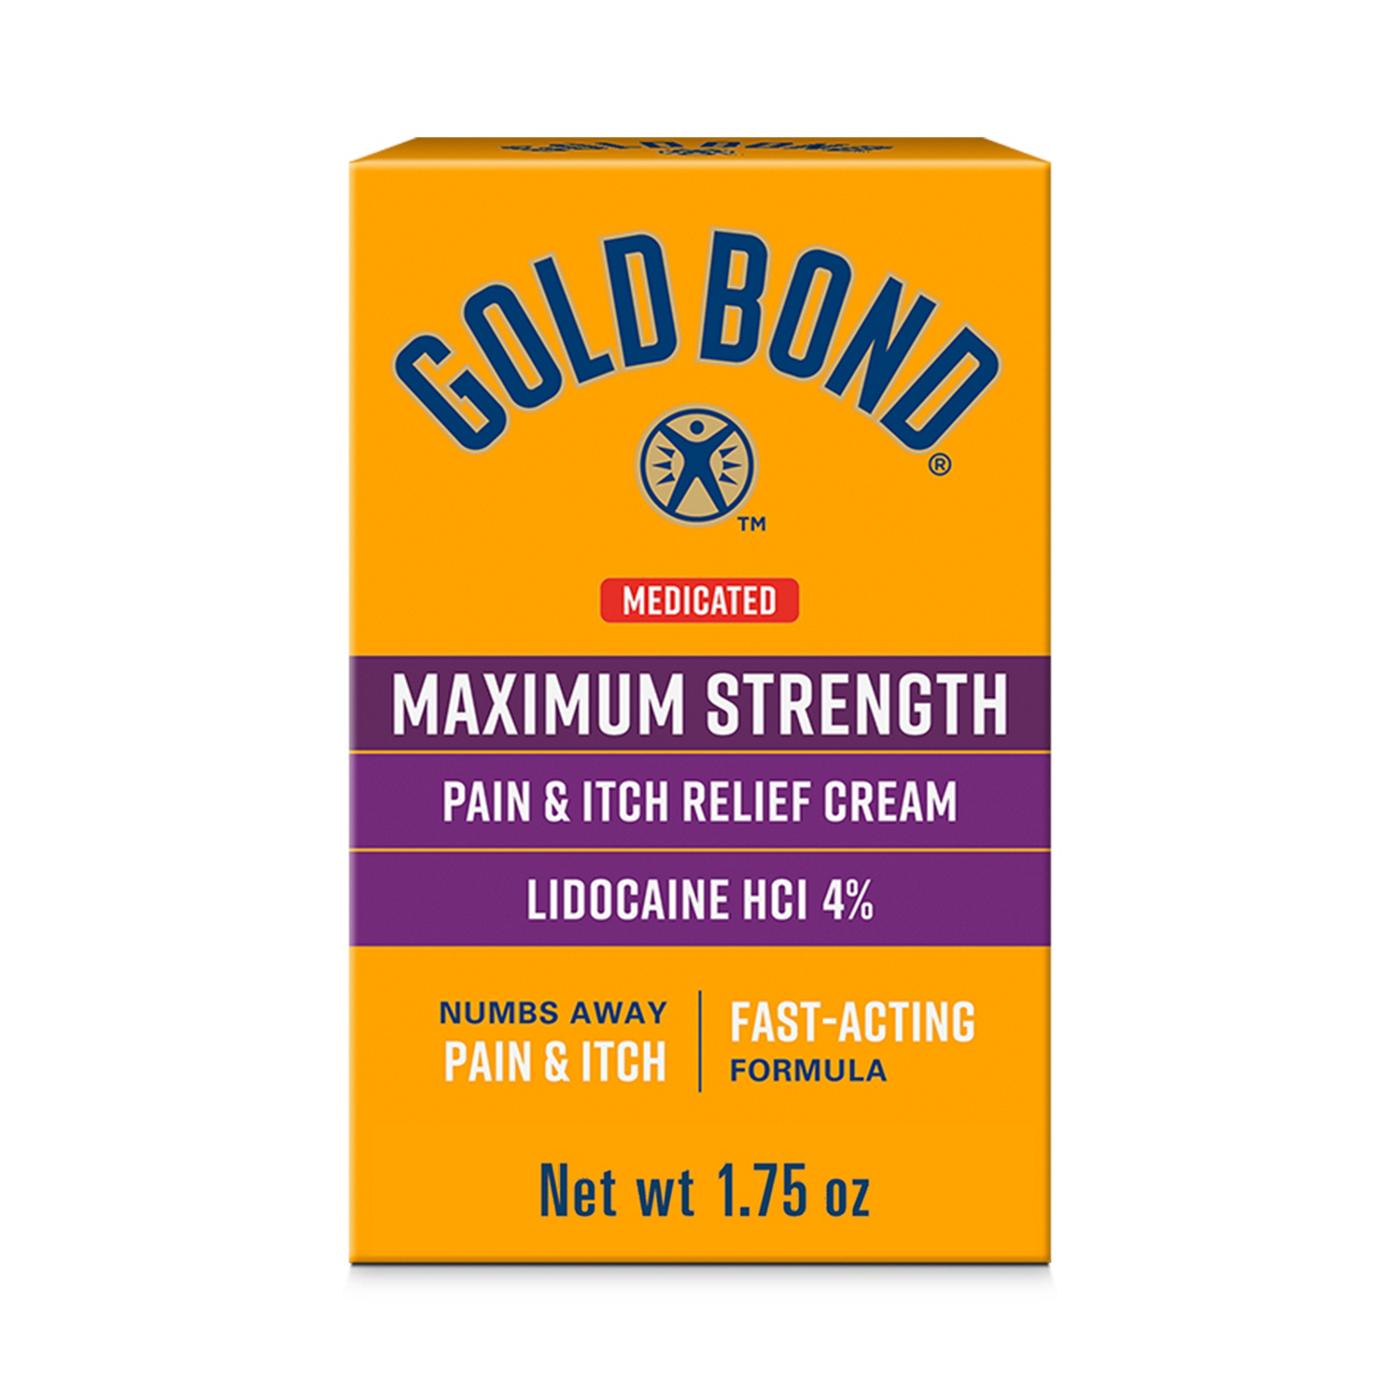 Gold Bond Medicated Max Strength Pain & Itch Cream; image 1 of 7